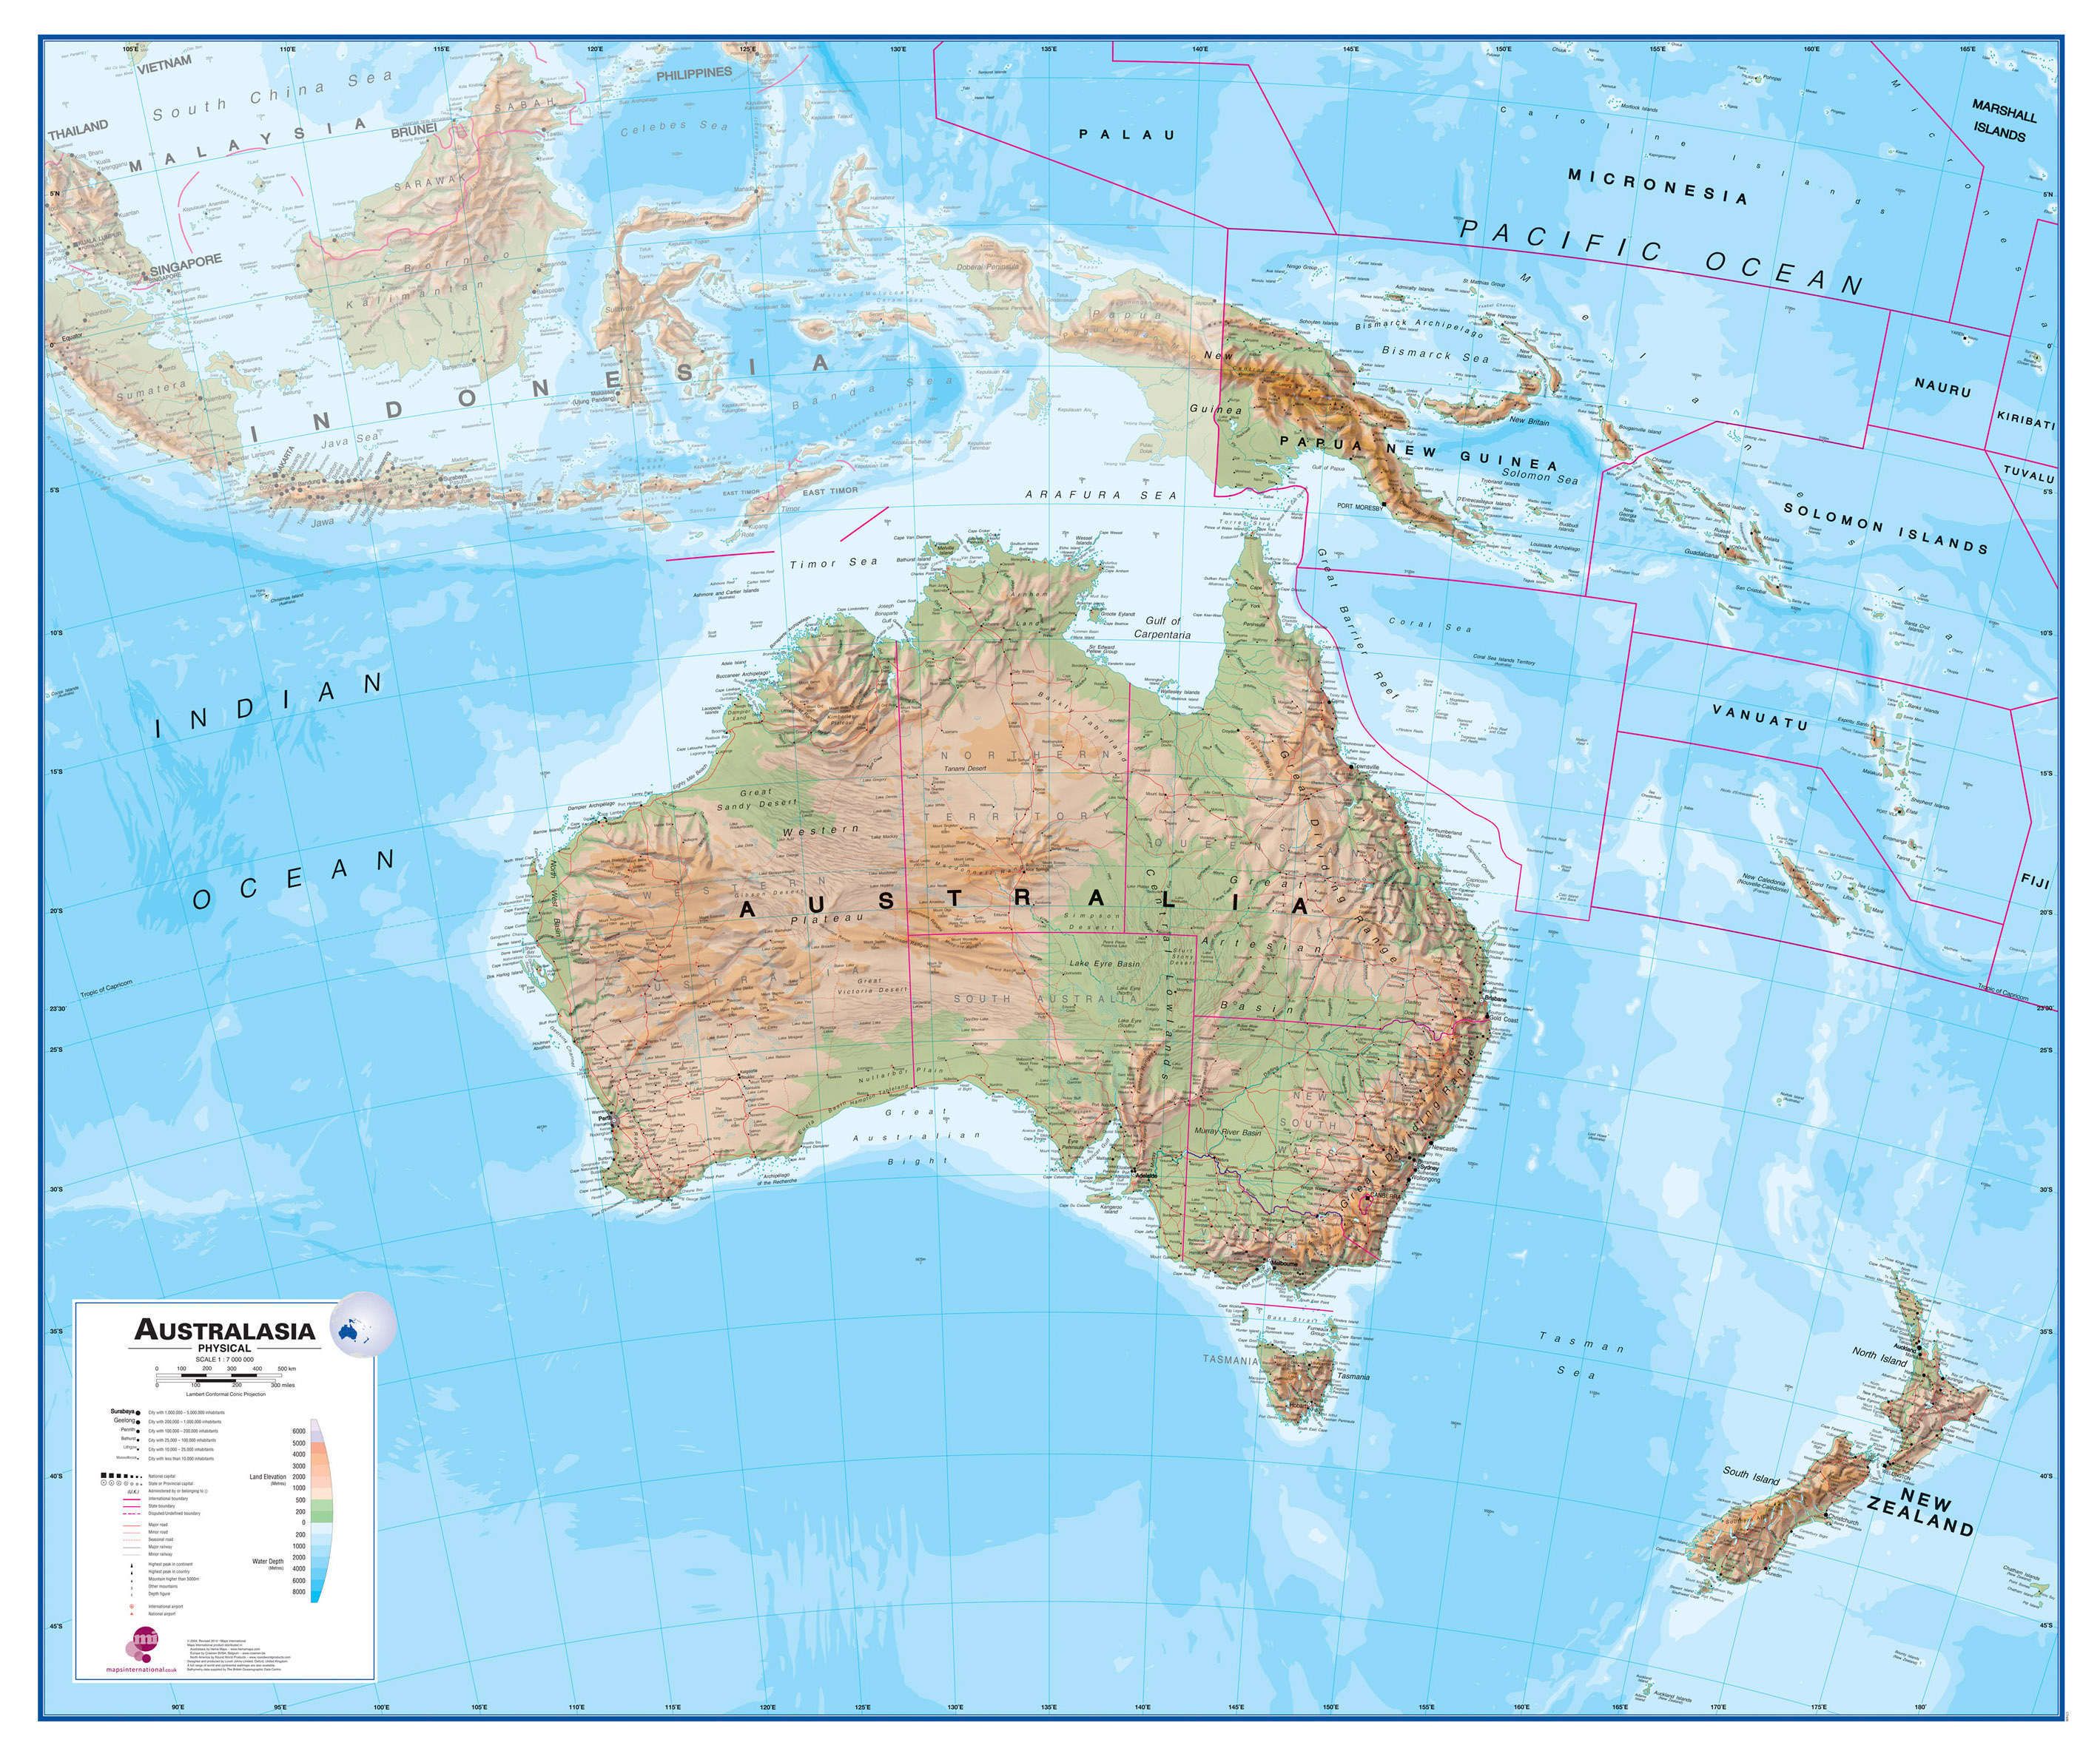 Large Australasia Wall Map Physical (Rolled Canvas - No Frame)